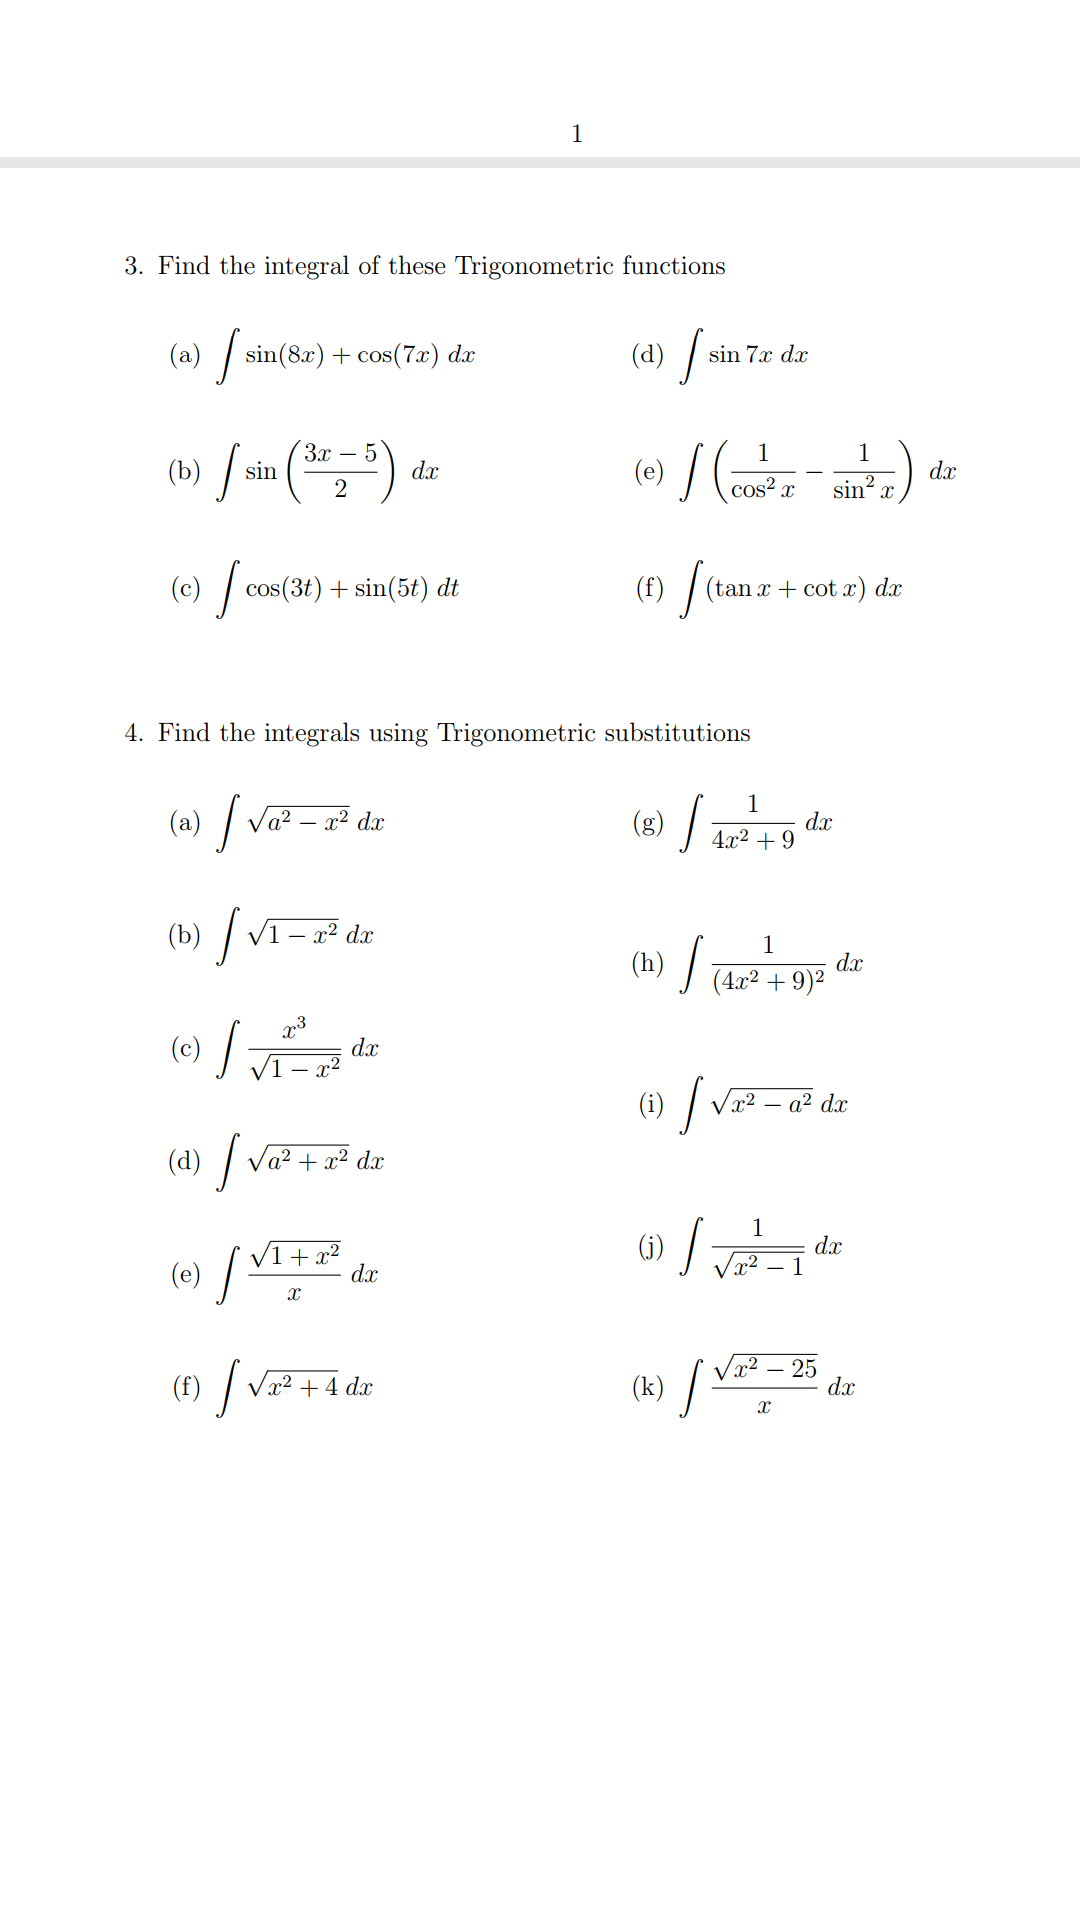 3. Find the integral of these Trigonometric functions
